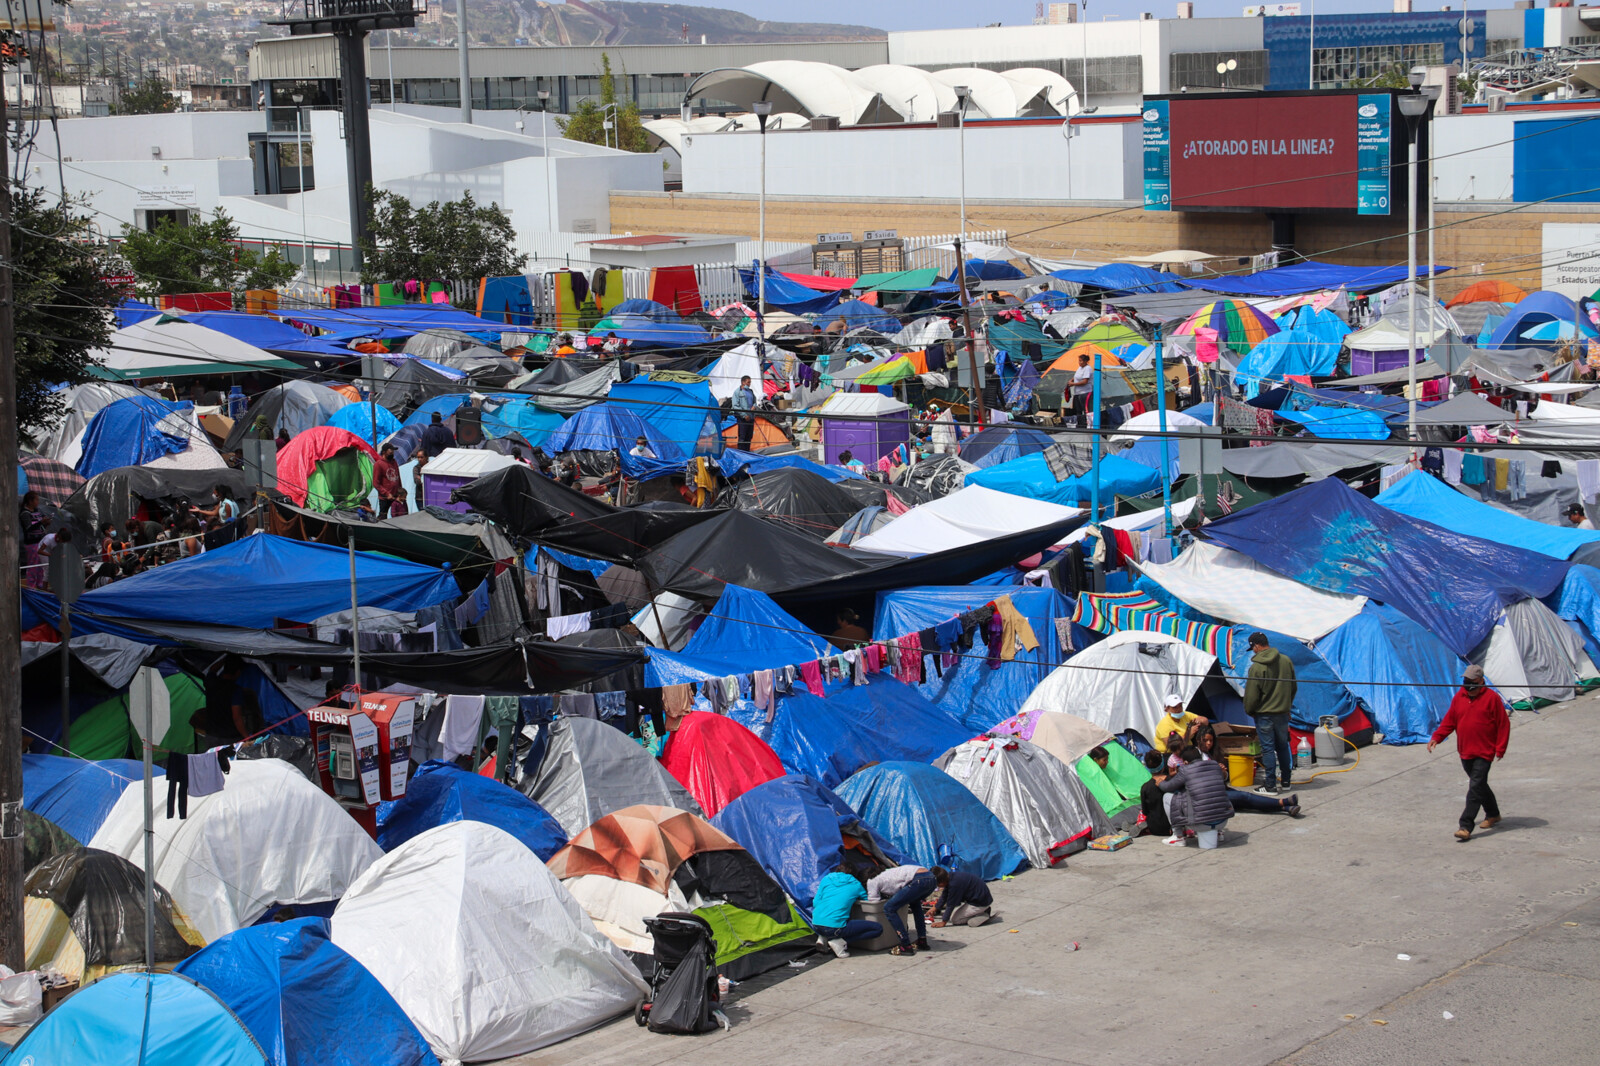 Numerous tents housing migrants at the U.S.-Mexico border